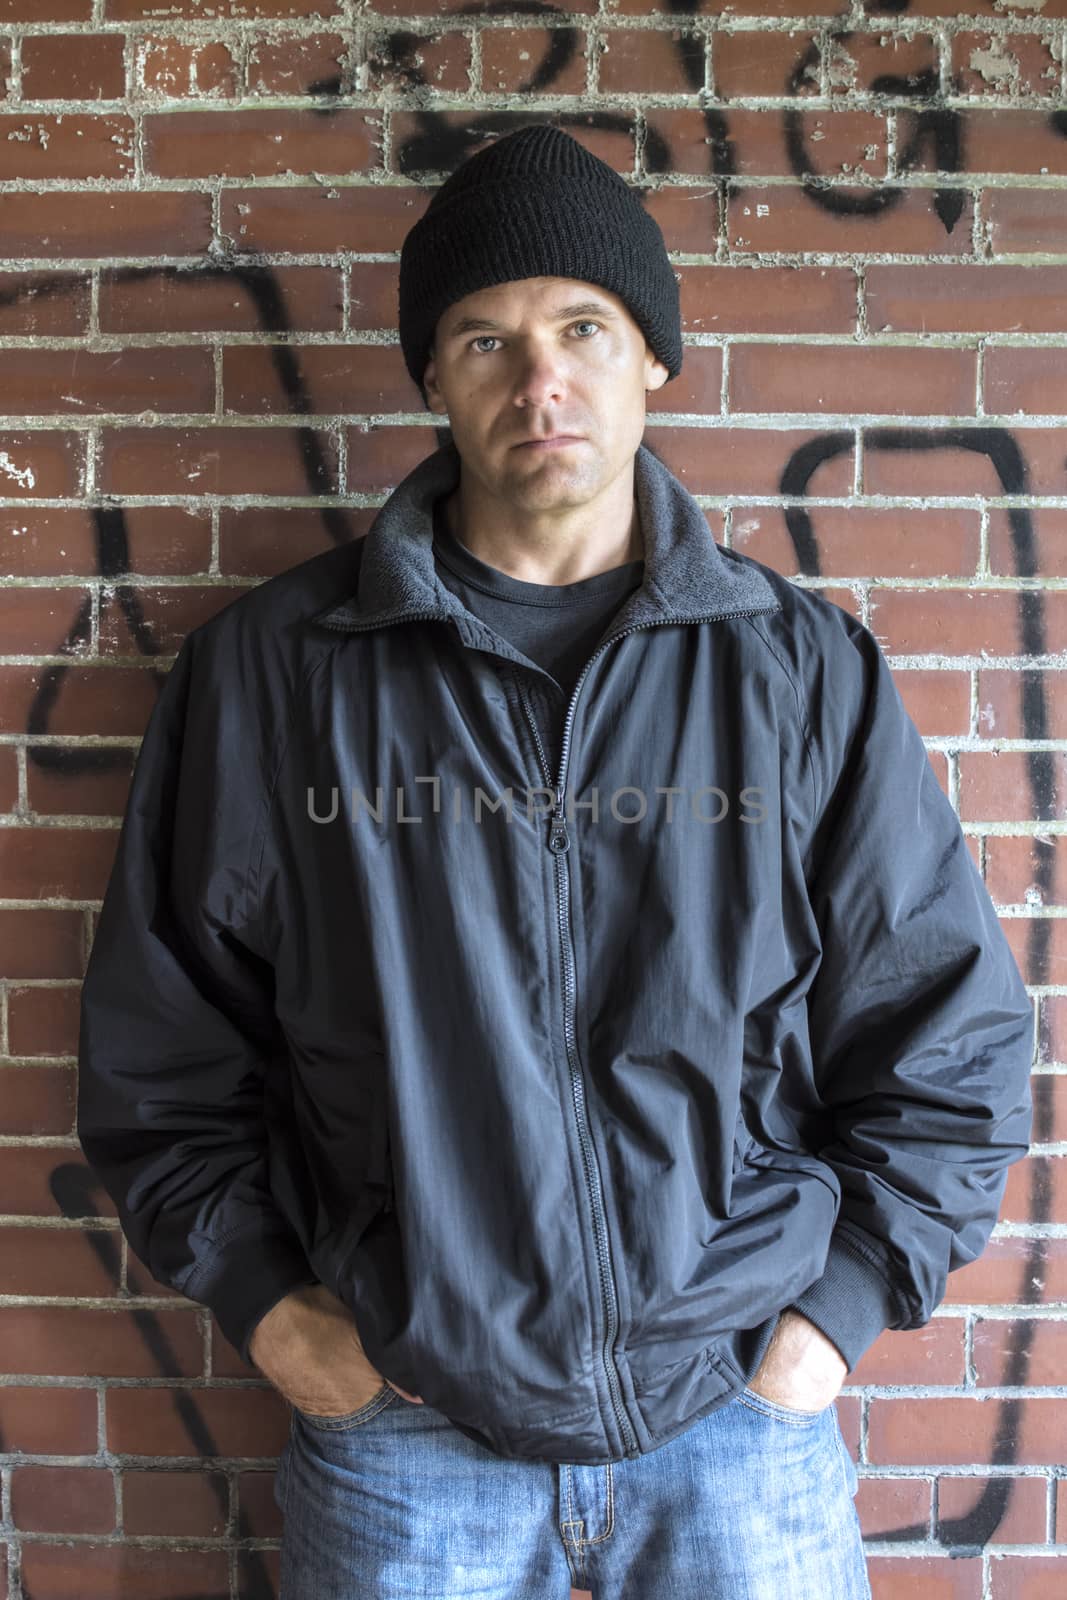 Caucasian man with serious expression wears hoodie, jacket and jeans and leans against brick wall with graffiti in urban setting with hands in pockets